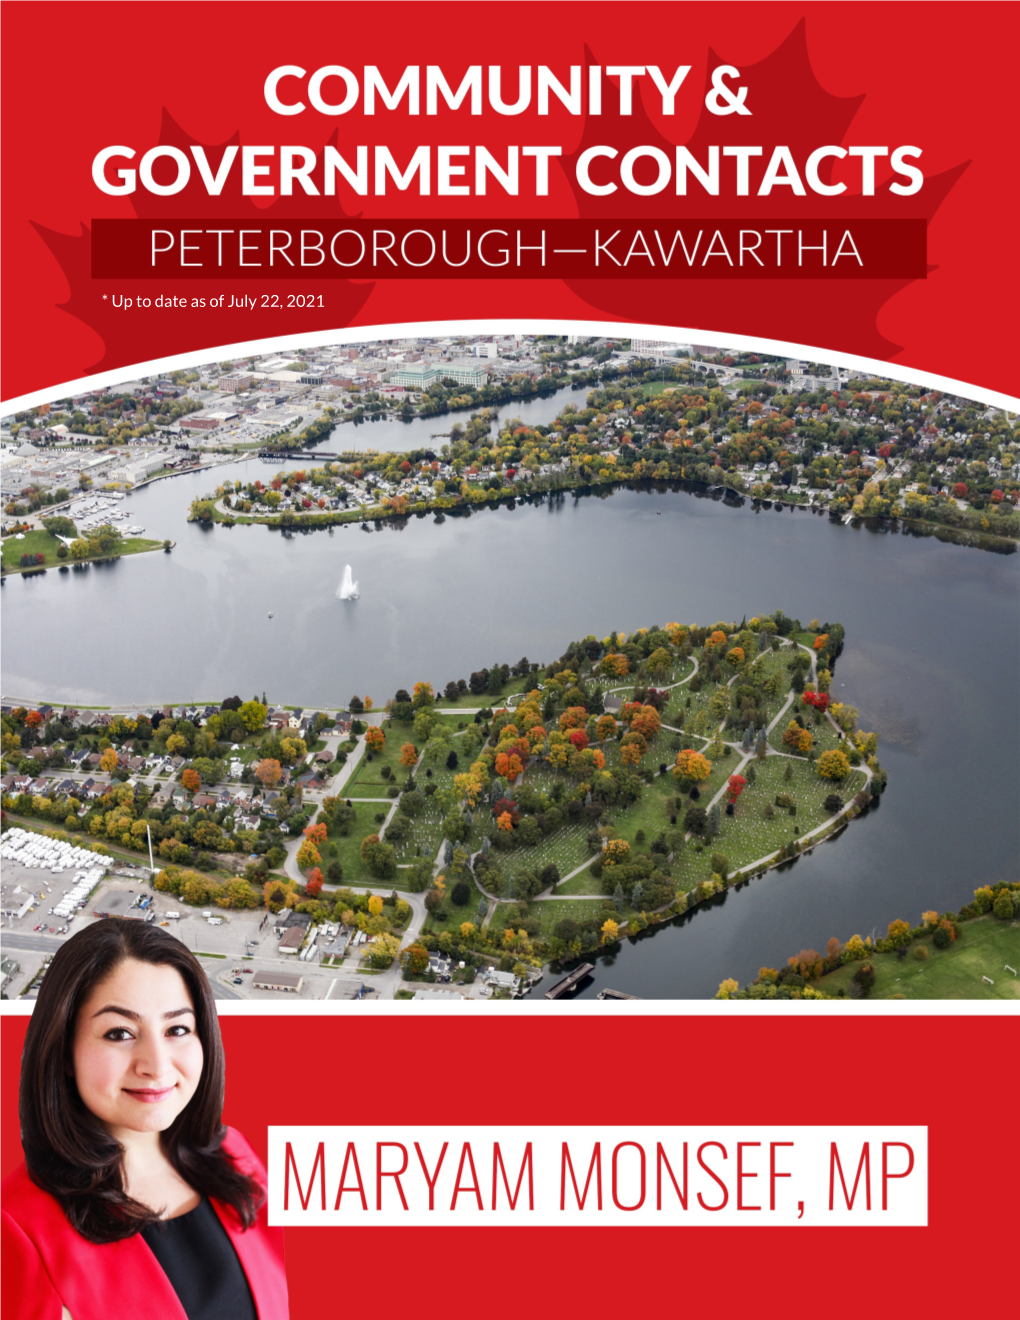 To Download a List of Community and Government Contacts